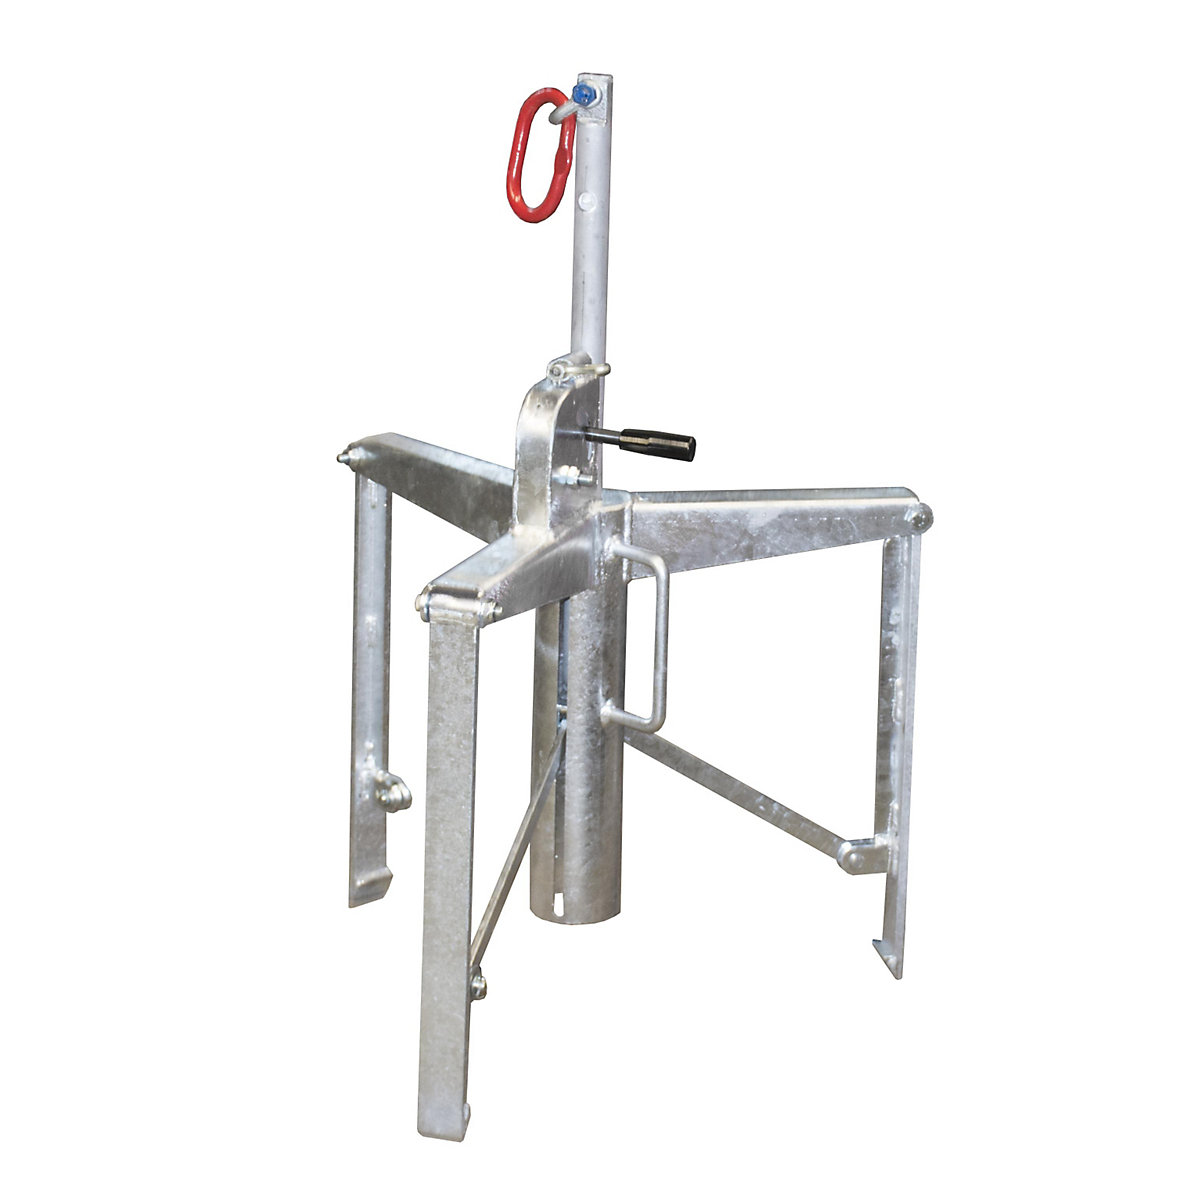 Drum gripper with 3-point clamping system – eurokraft pro, for 60 to 220 l drums, galvanised